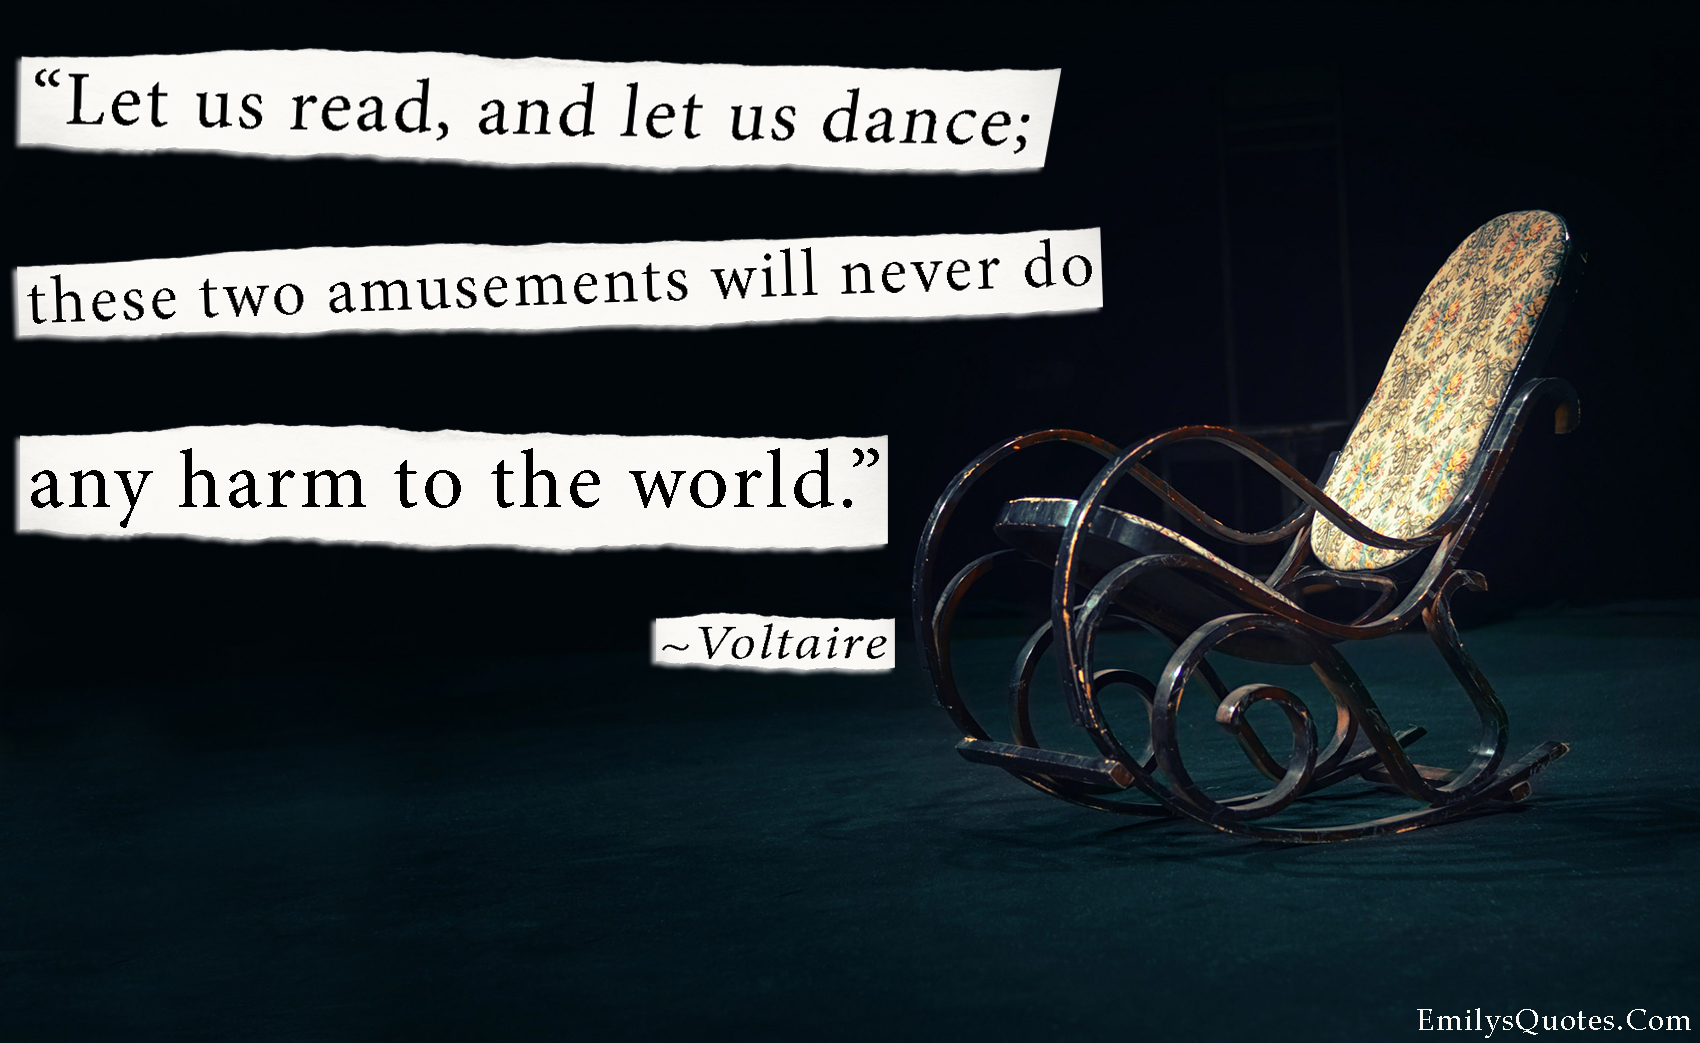 Let us read, and let us dance; these two amusements will never do any harm to the world